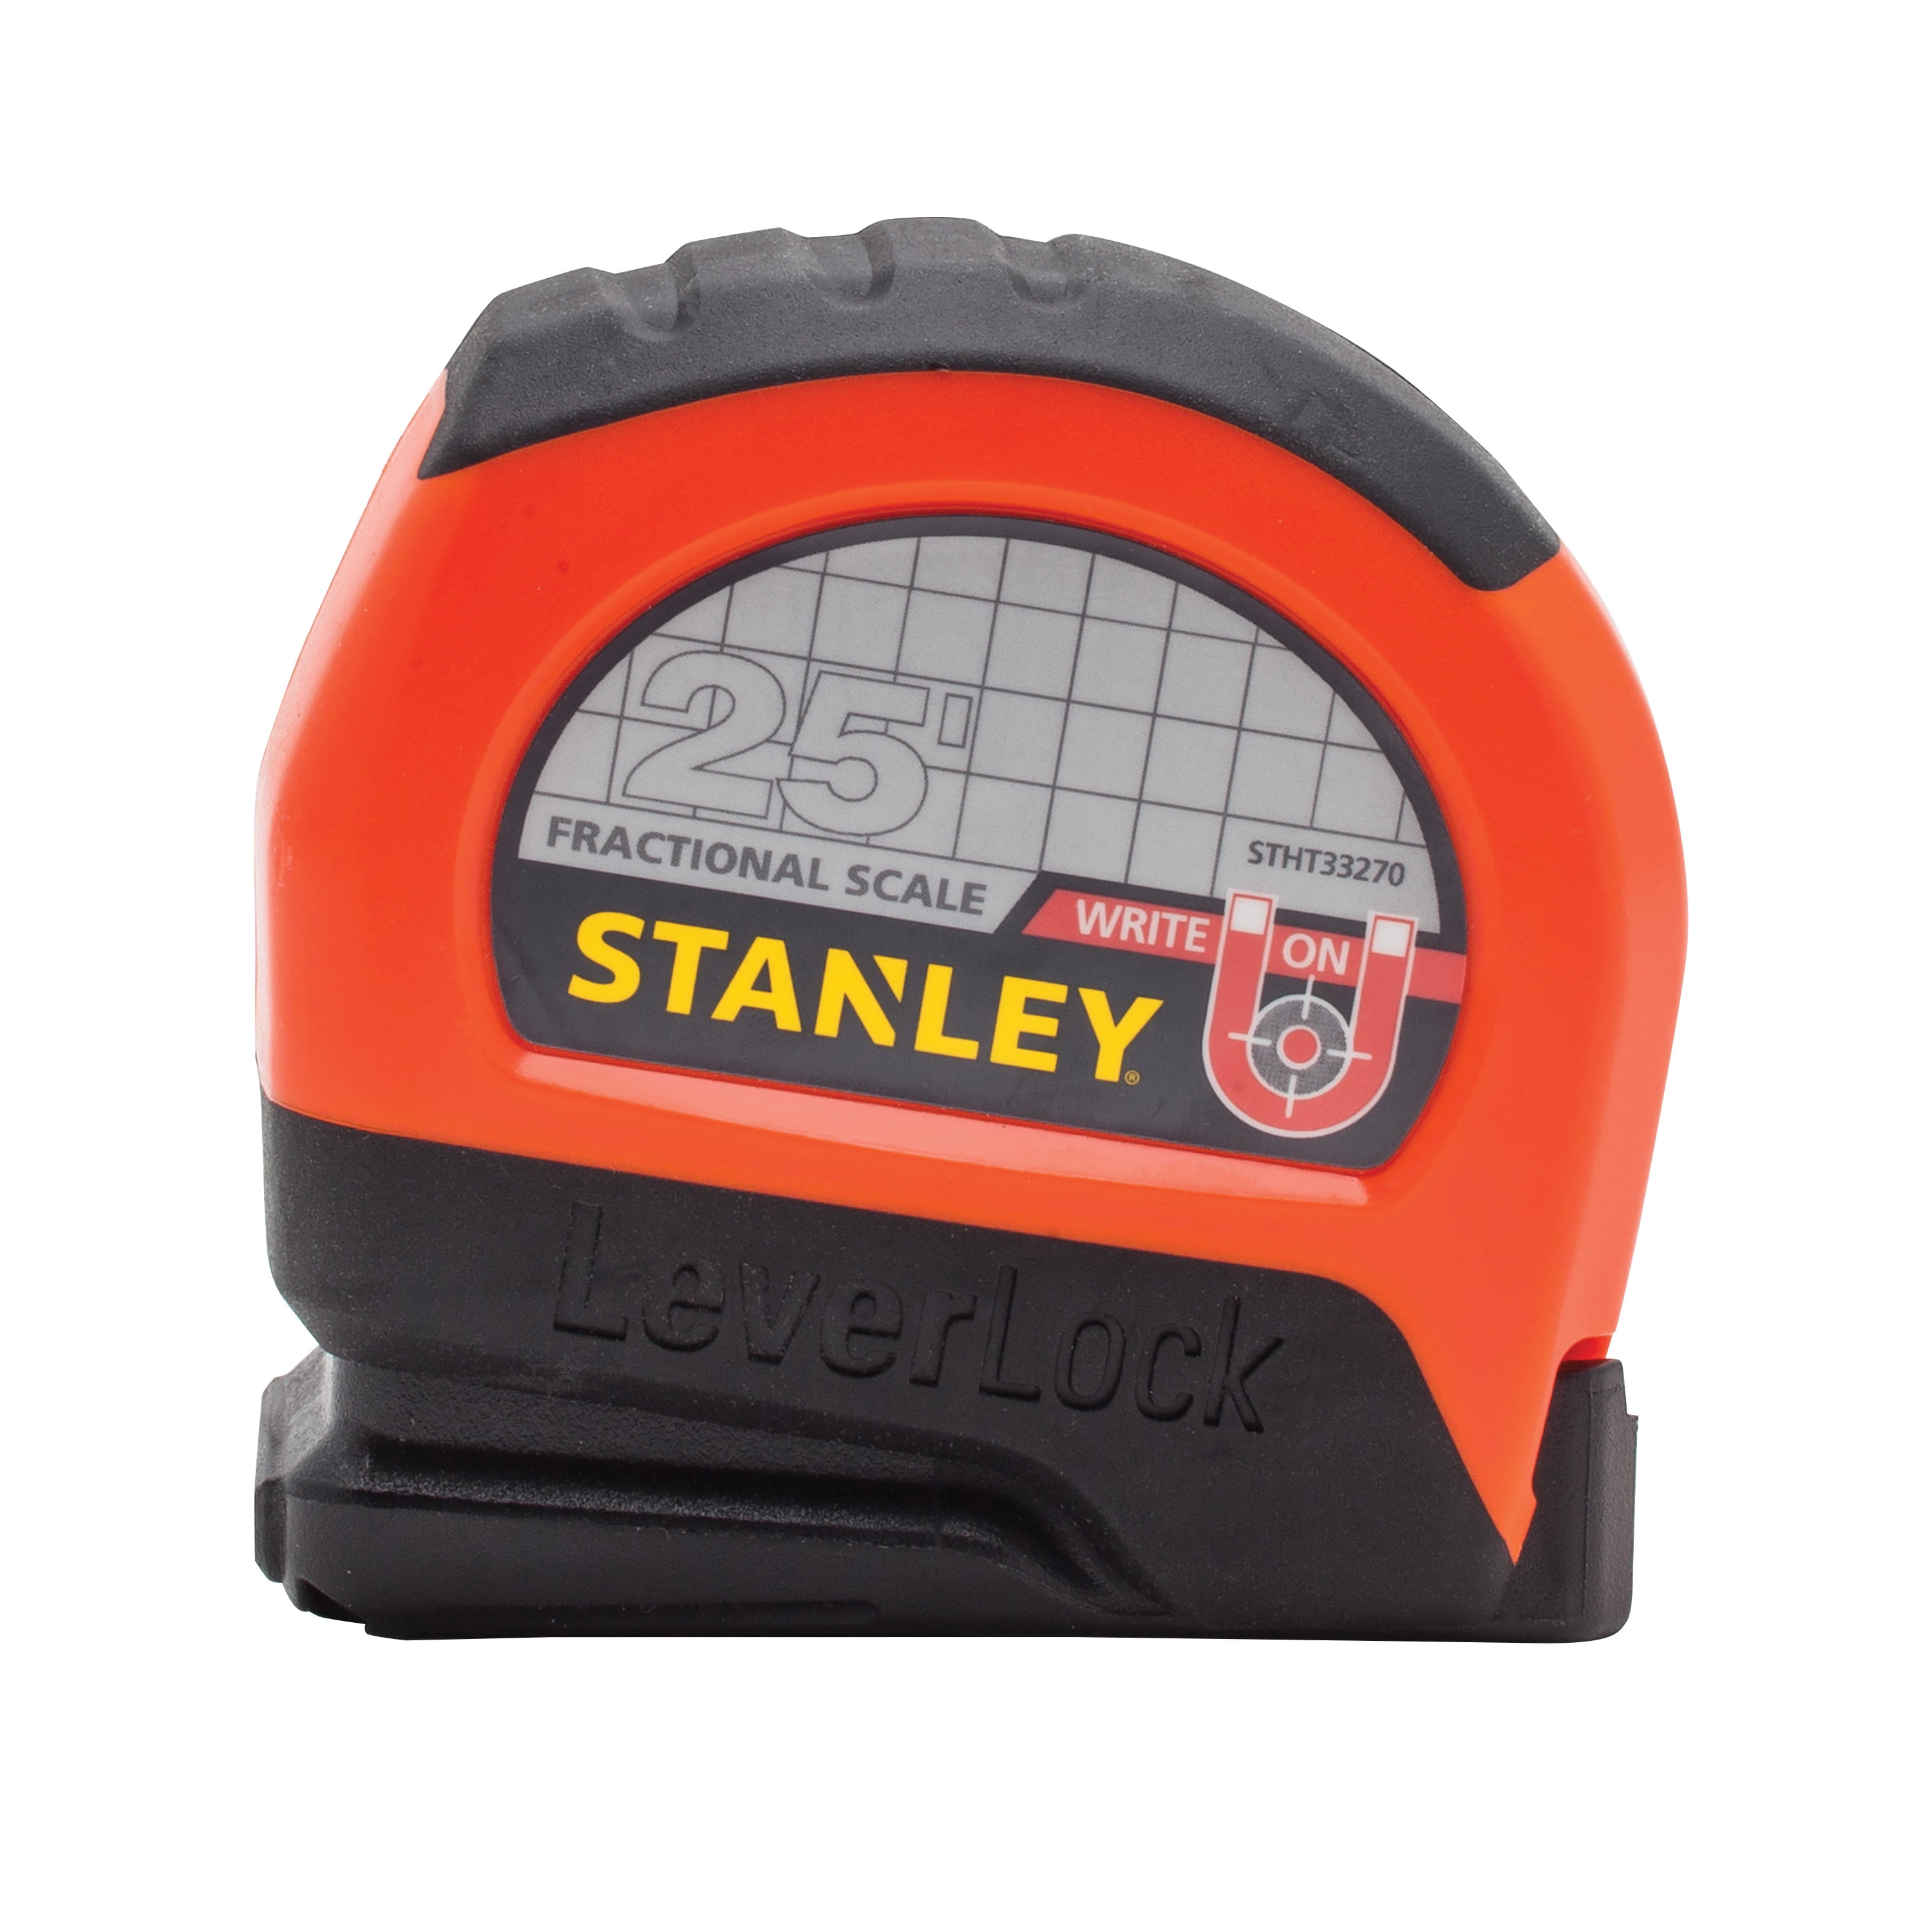 -Stanley 25/' Long X 1/" Wide Blade Fractional Read Yellow Tape Measure 30-454 3